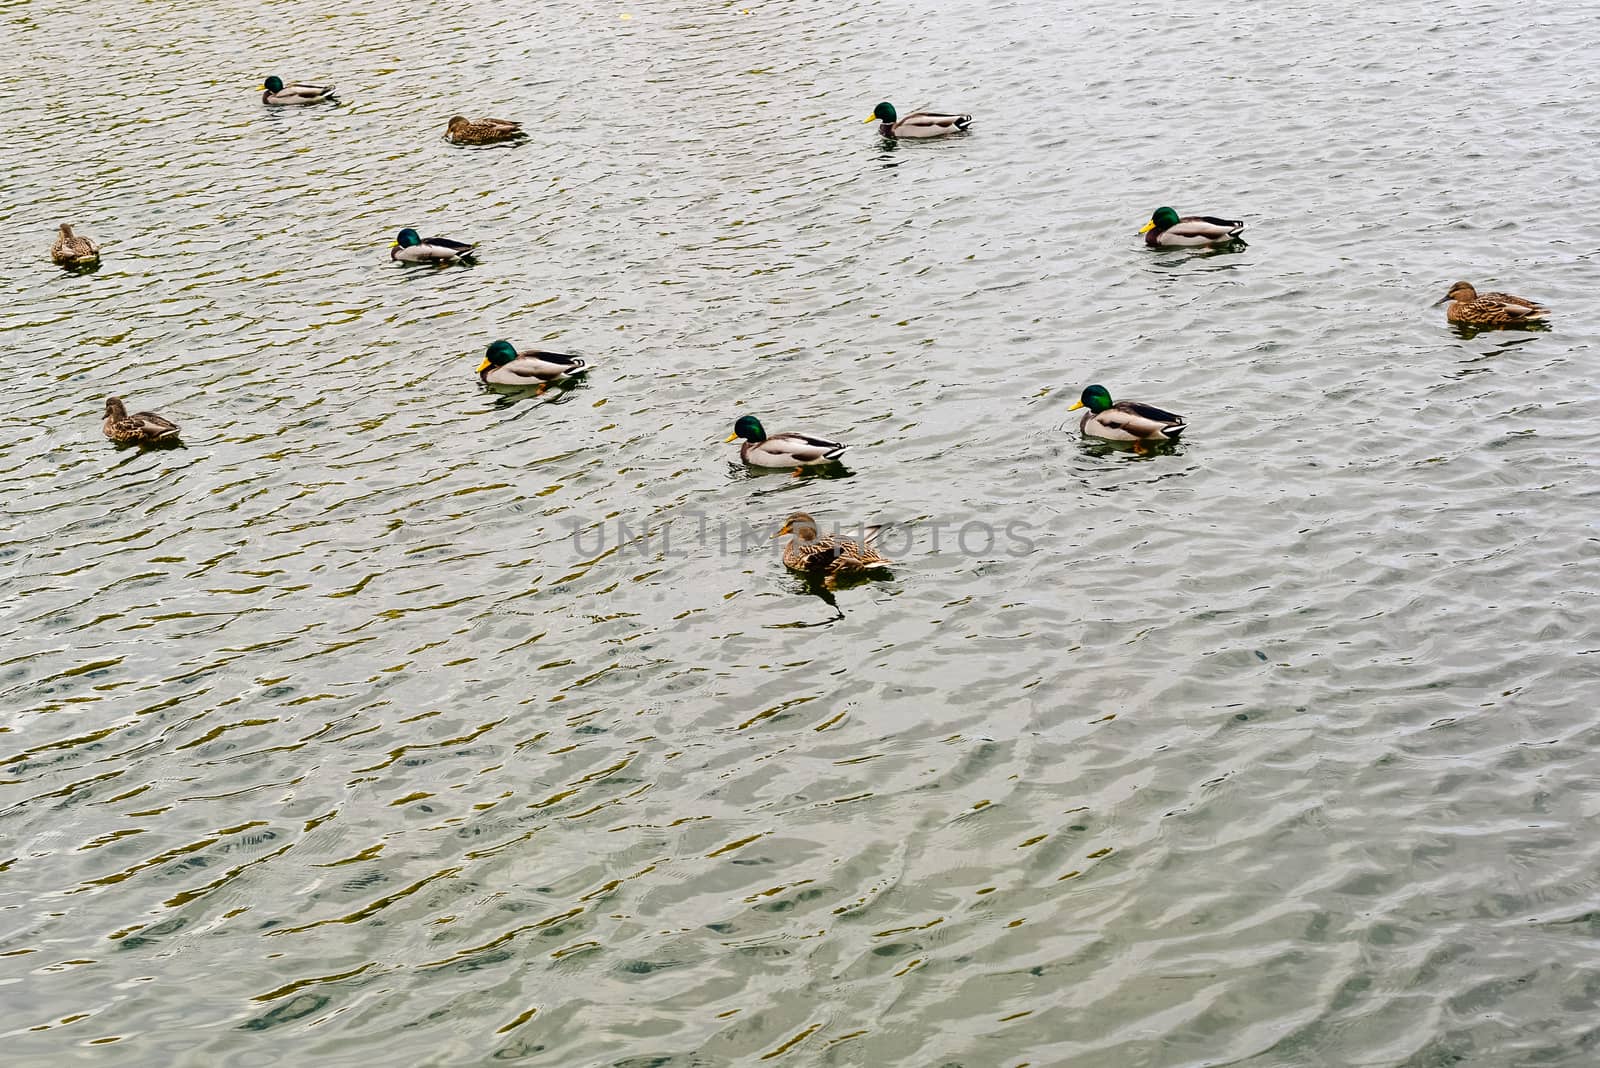 ducks-females and drakes - on the water of the lake in the autumn Park